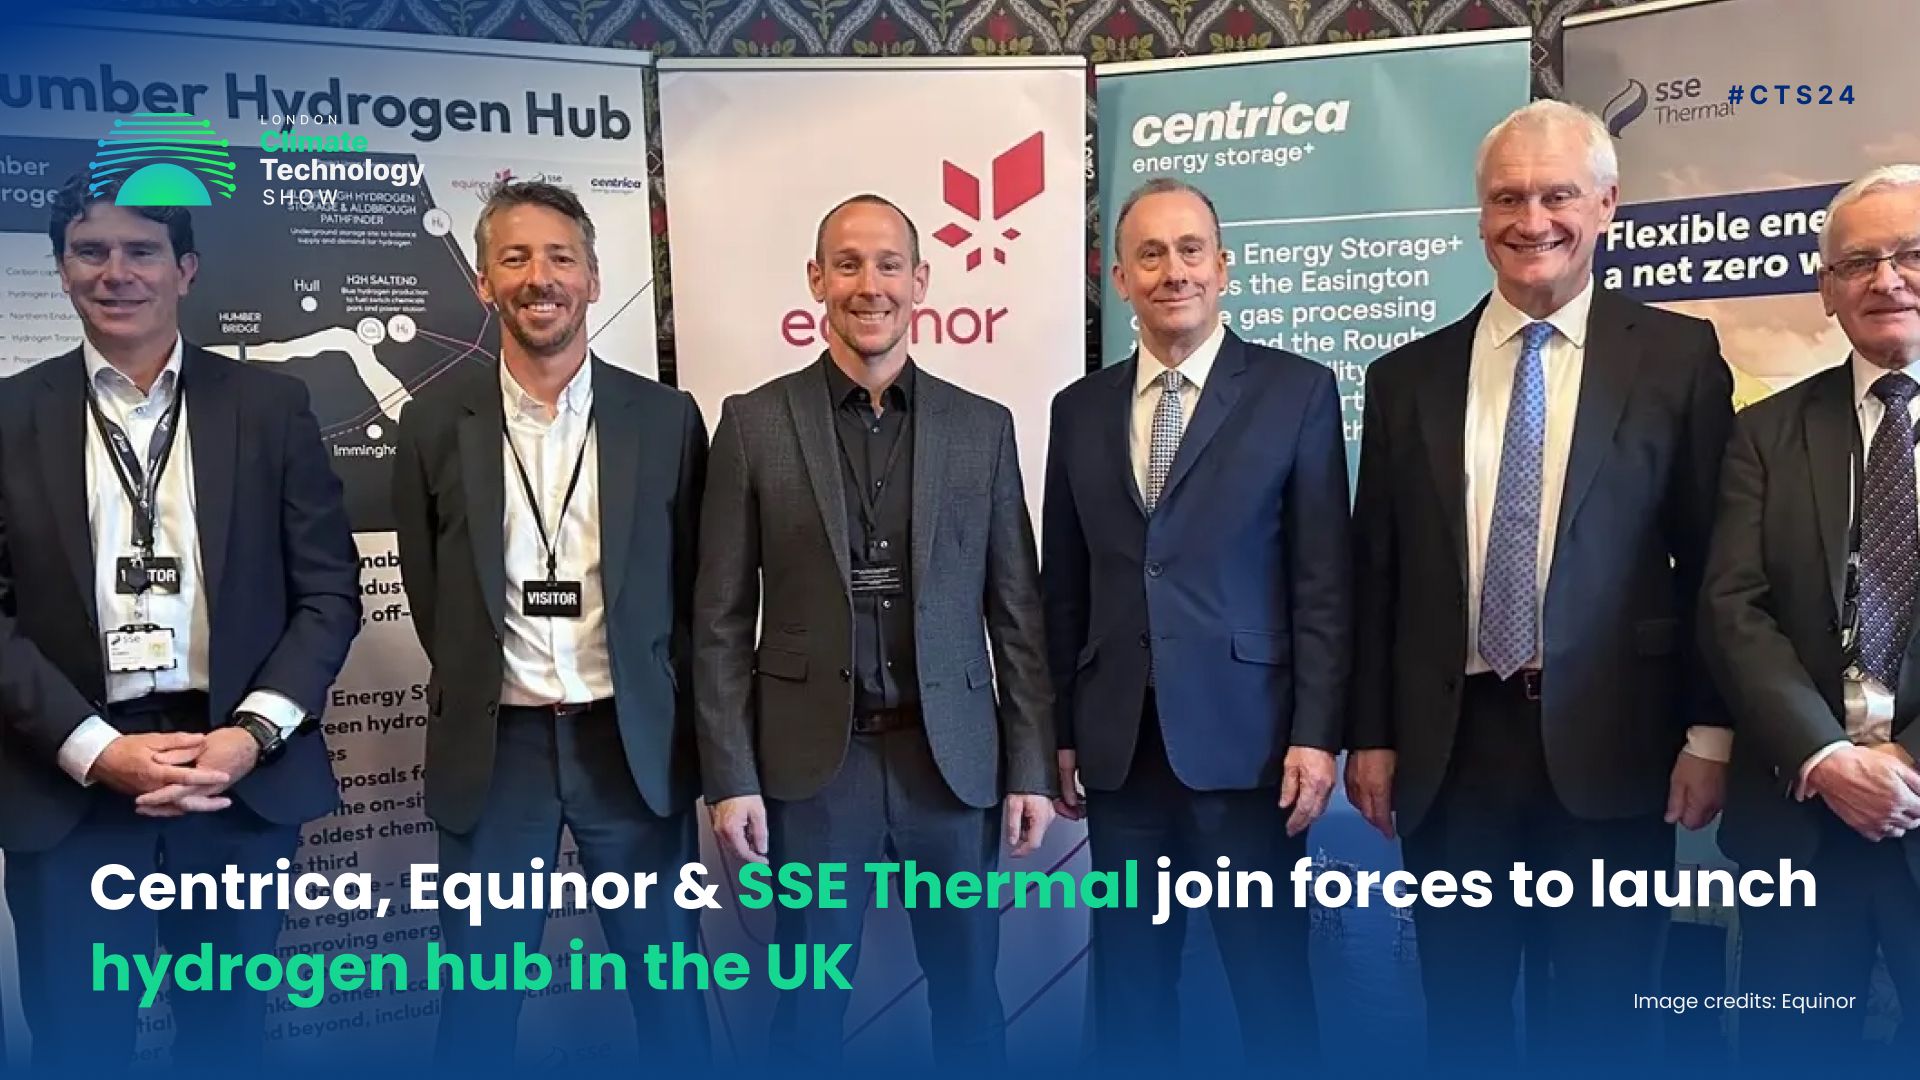 Centrica, Equinor & SSE Thermal join forces to launch hydrogen hub in the UK